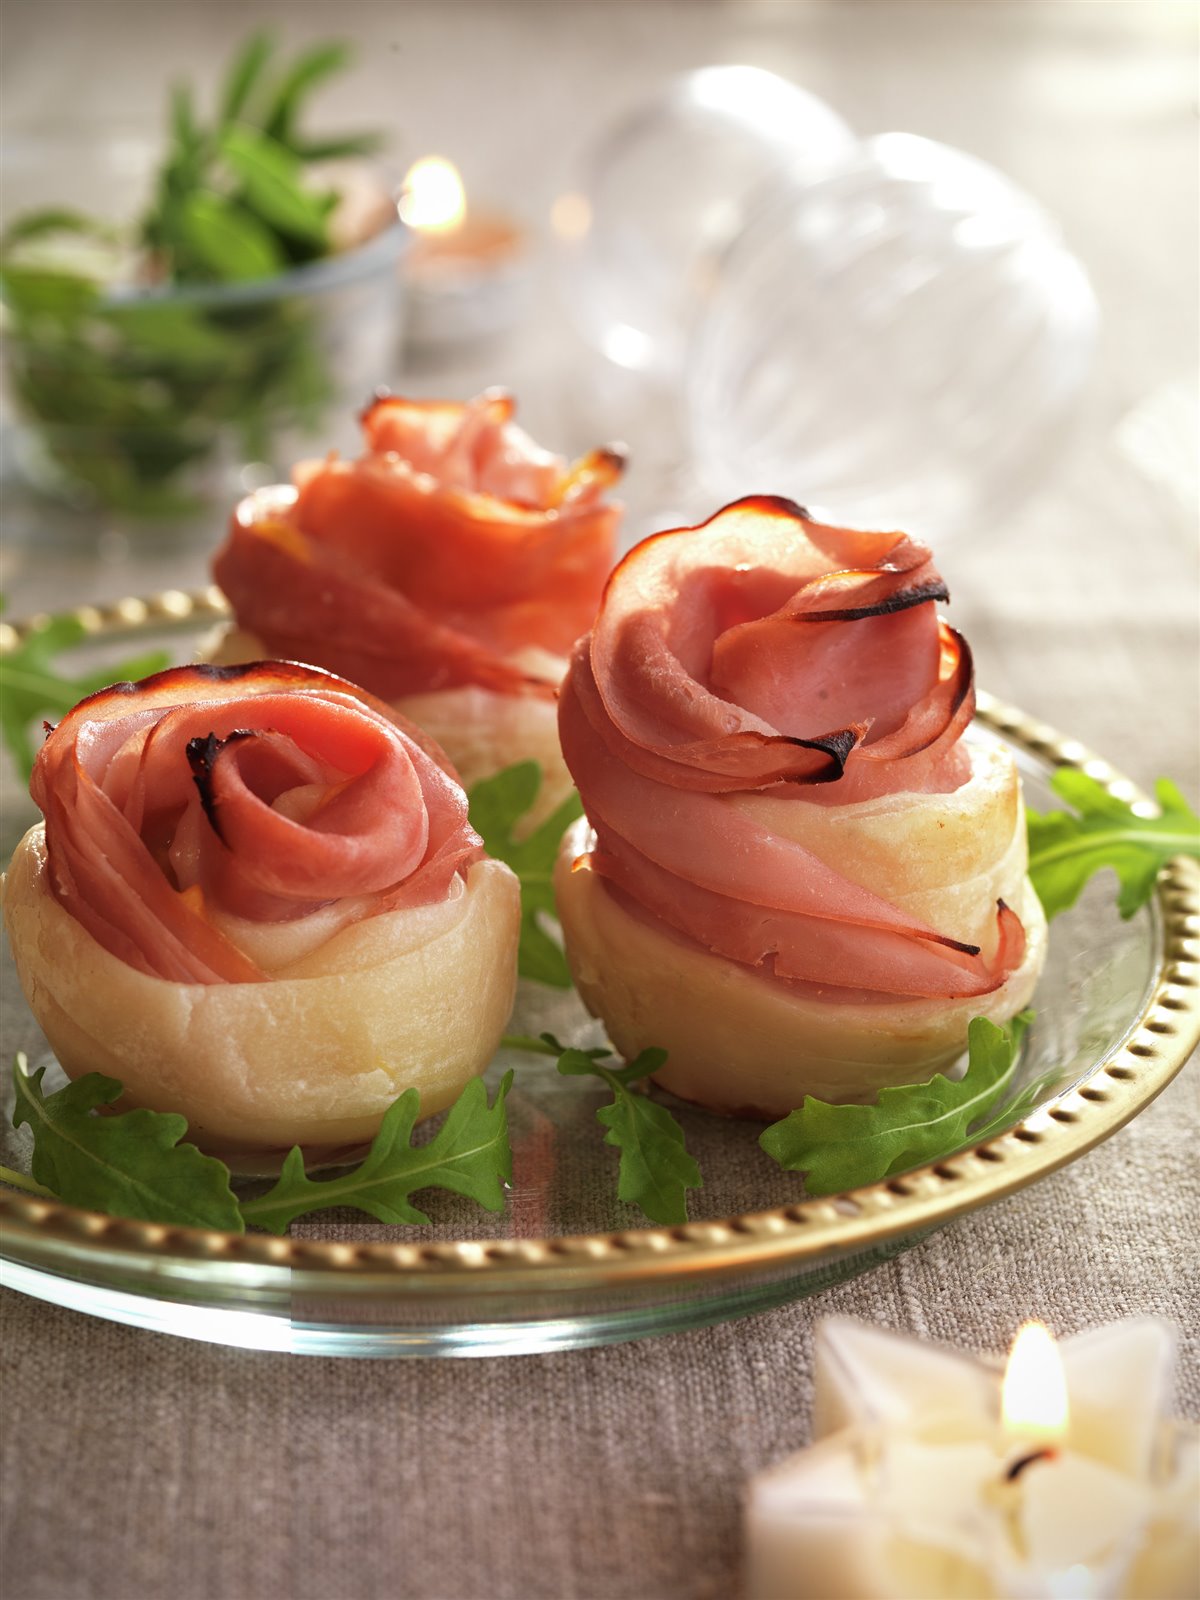 PASTRY HAM AND CHEESE ROSES.